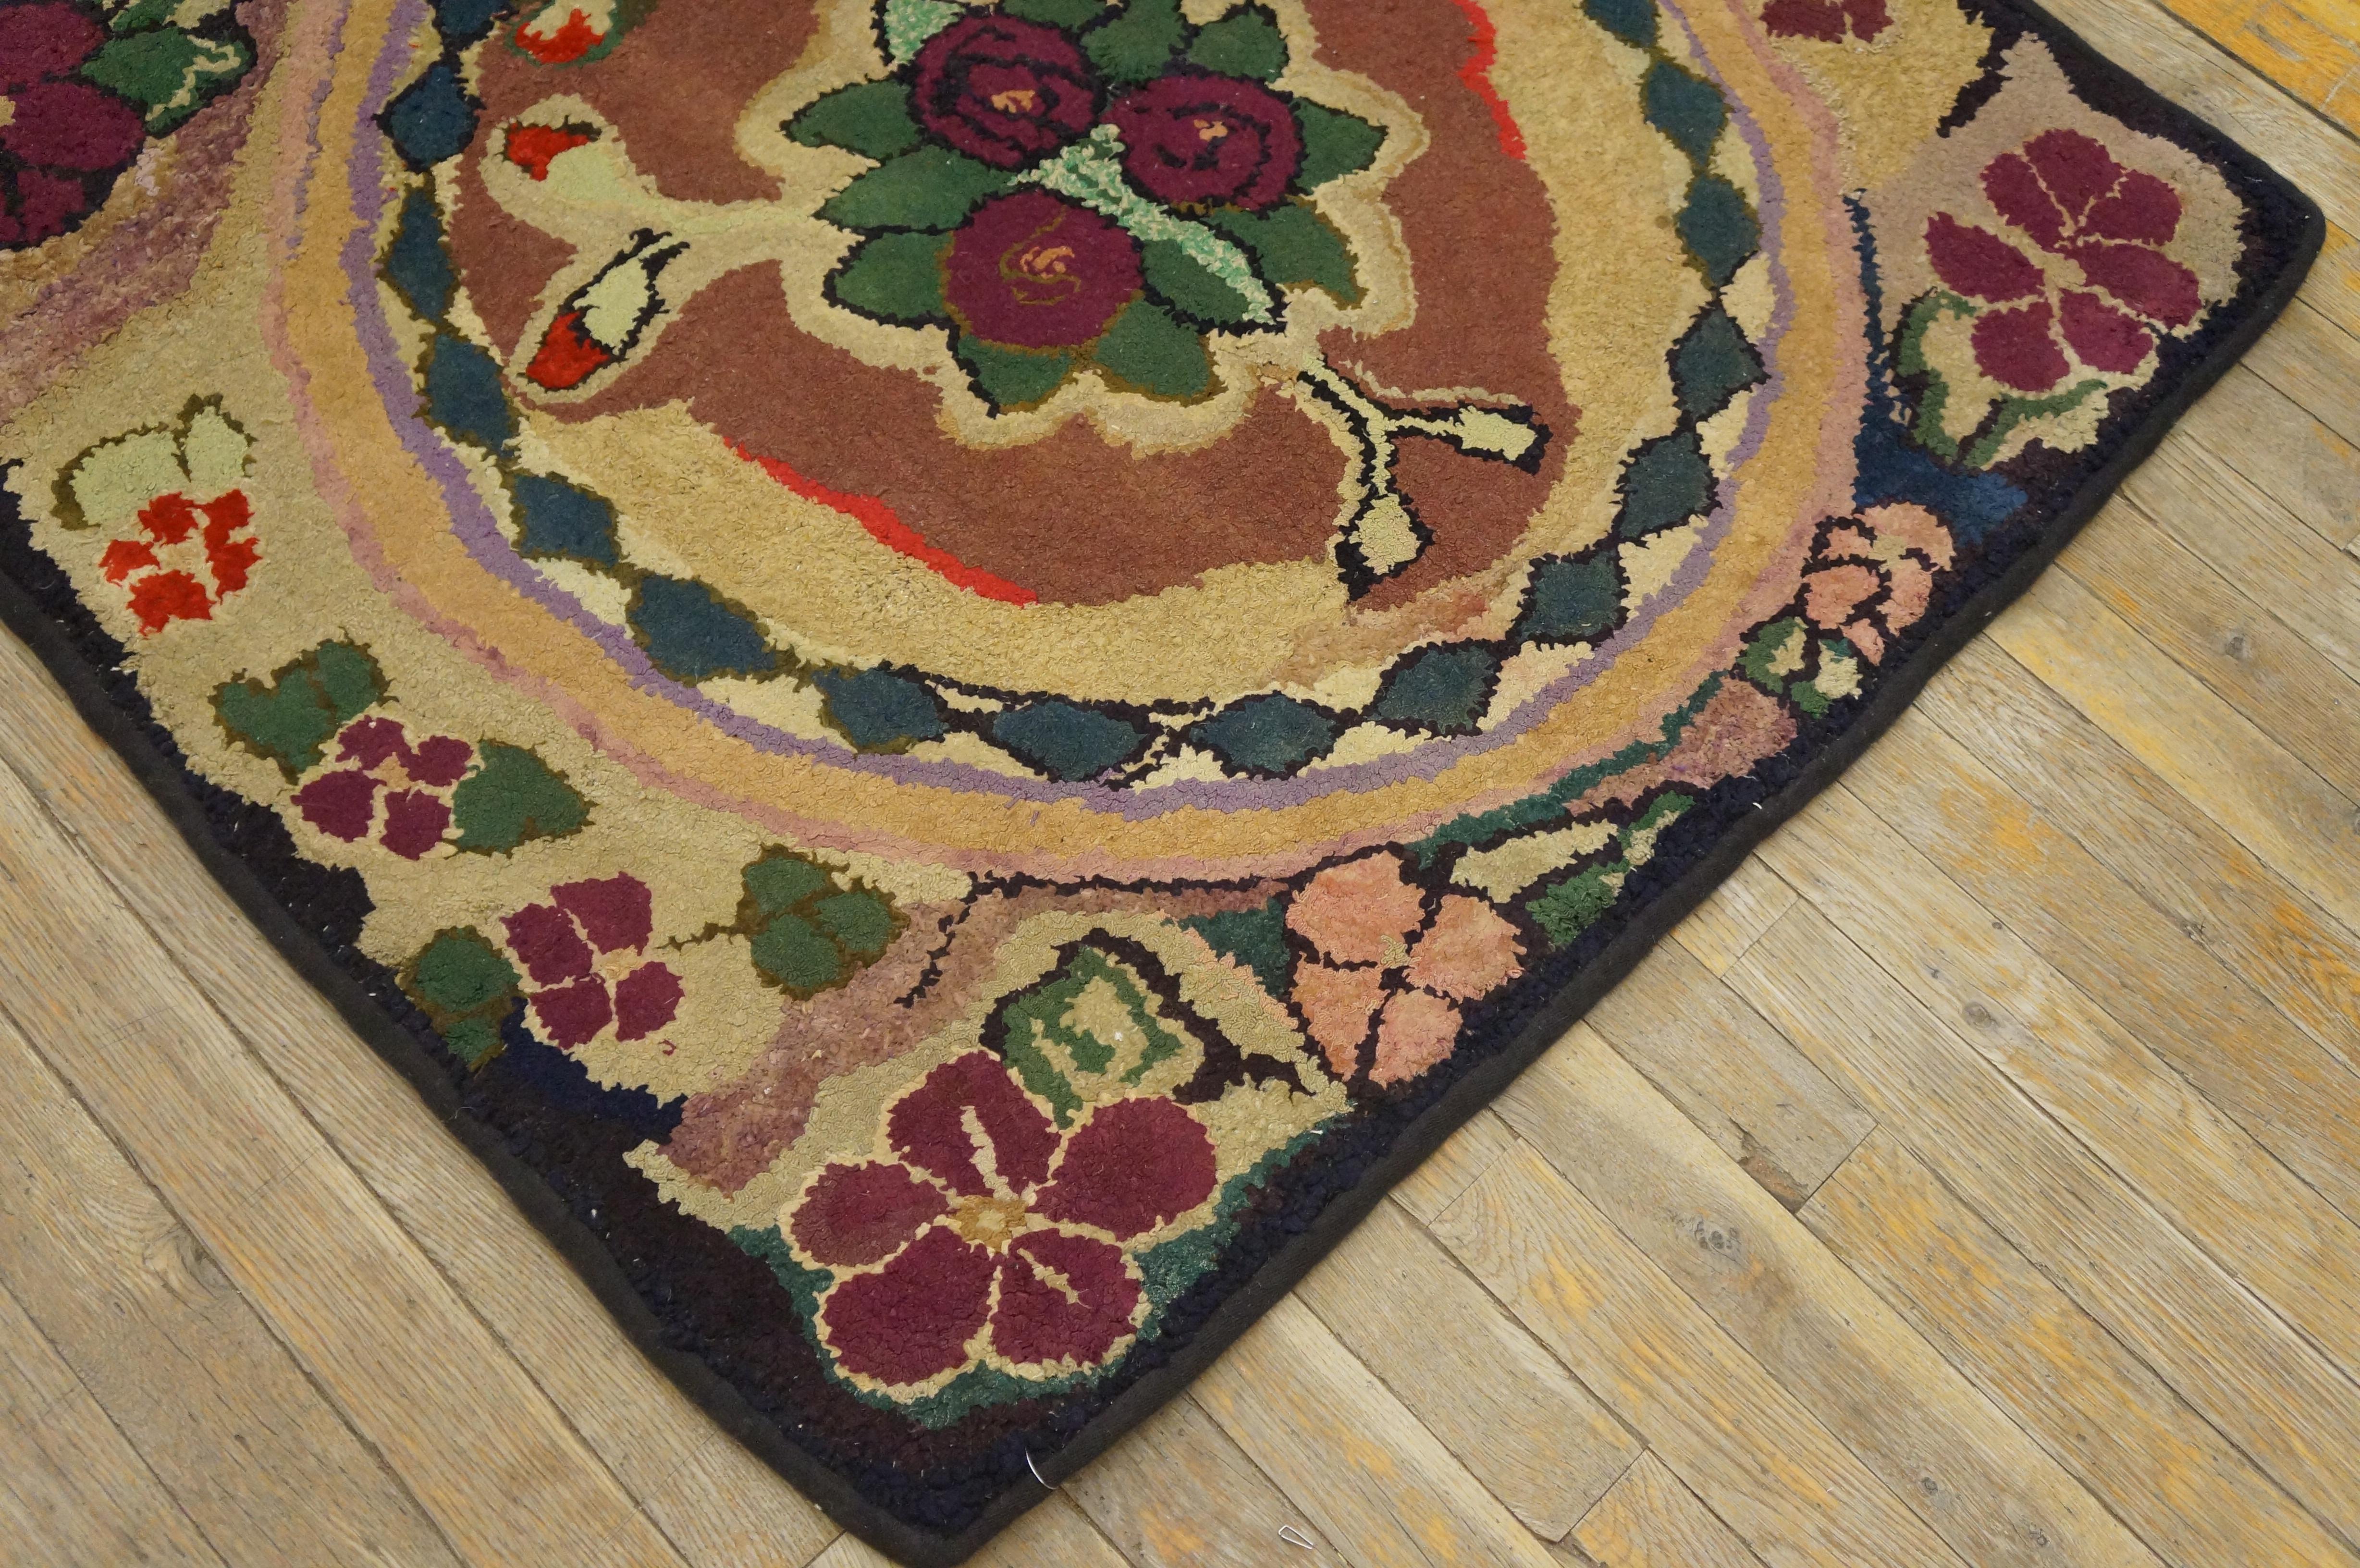 Hand-Woven Antique American Hooked Rug 3' 0